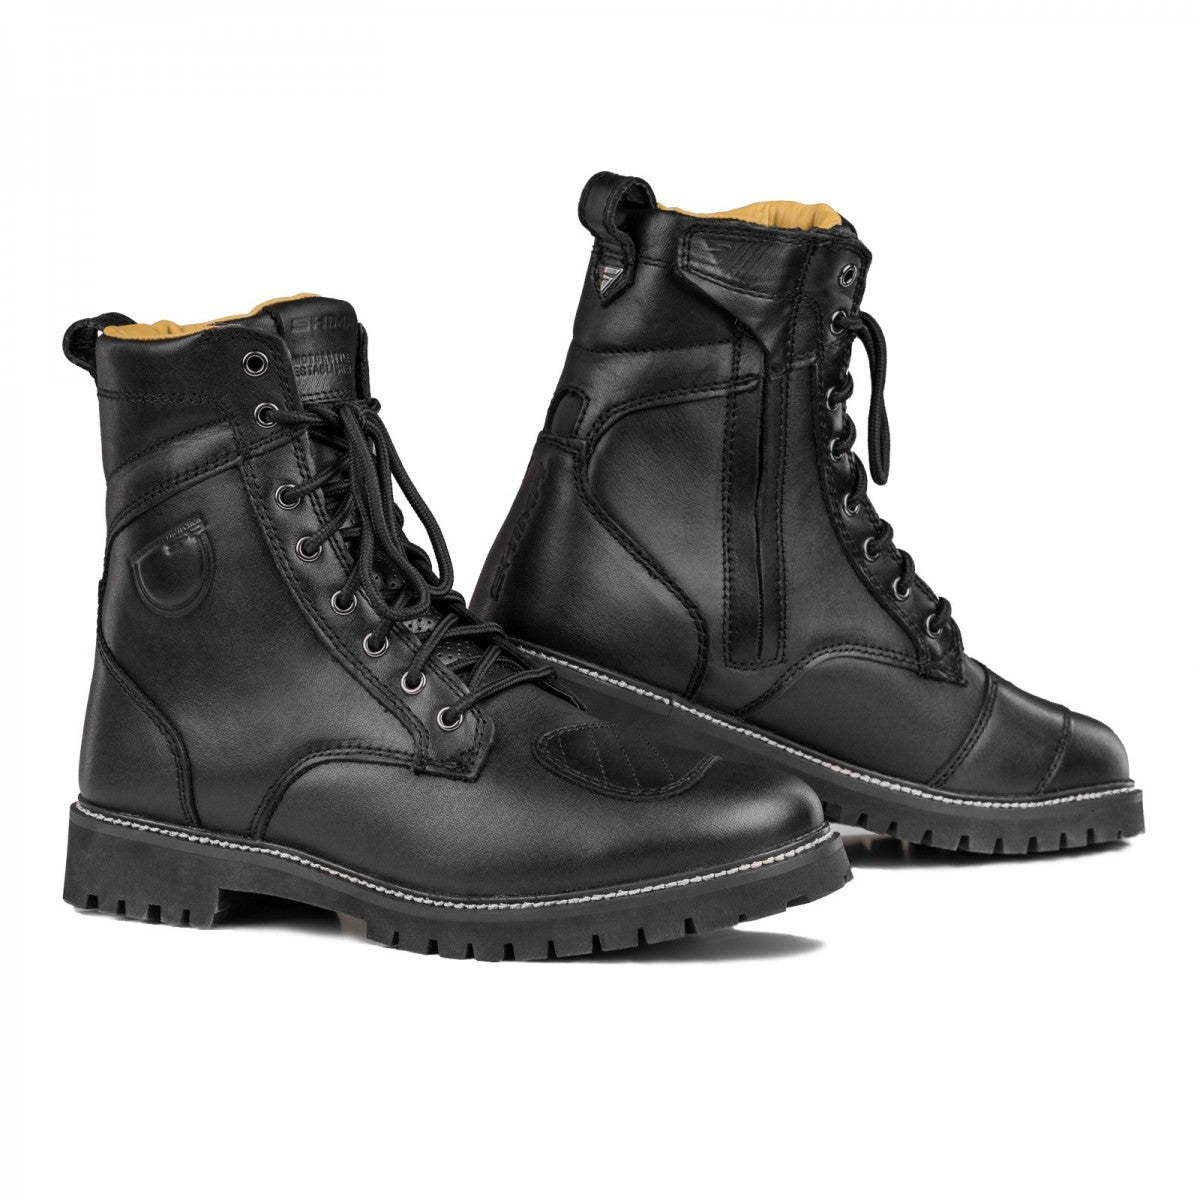 Thomson black motorcycle Shima boots for women 